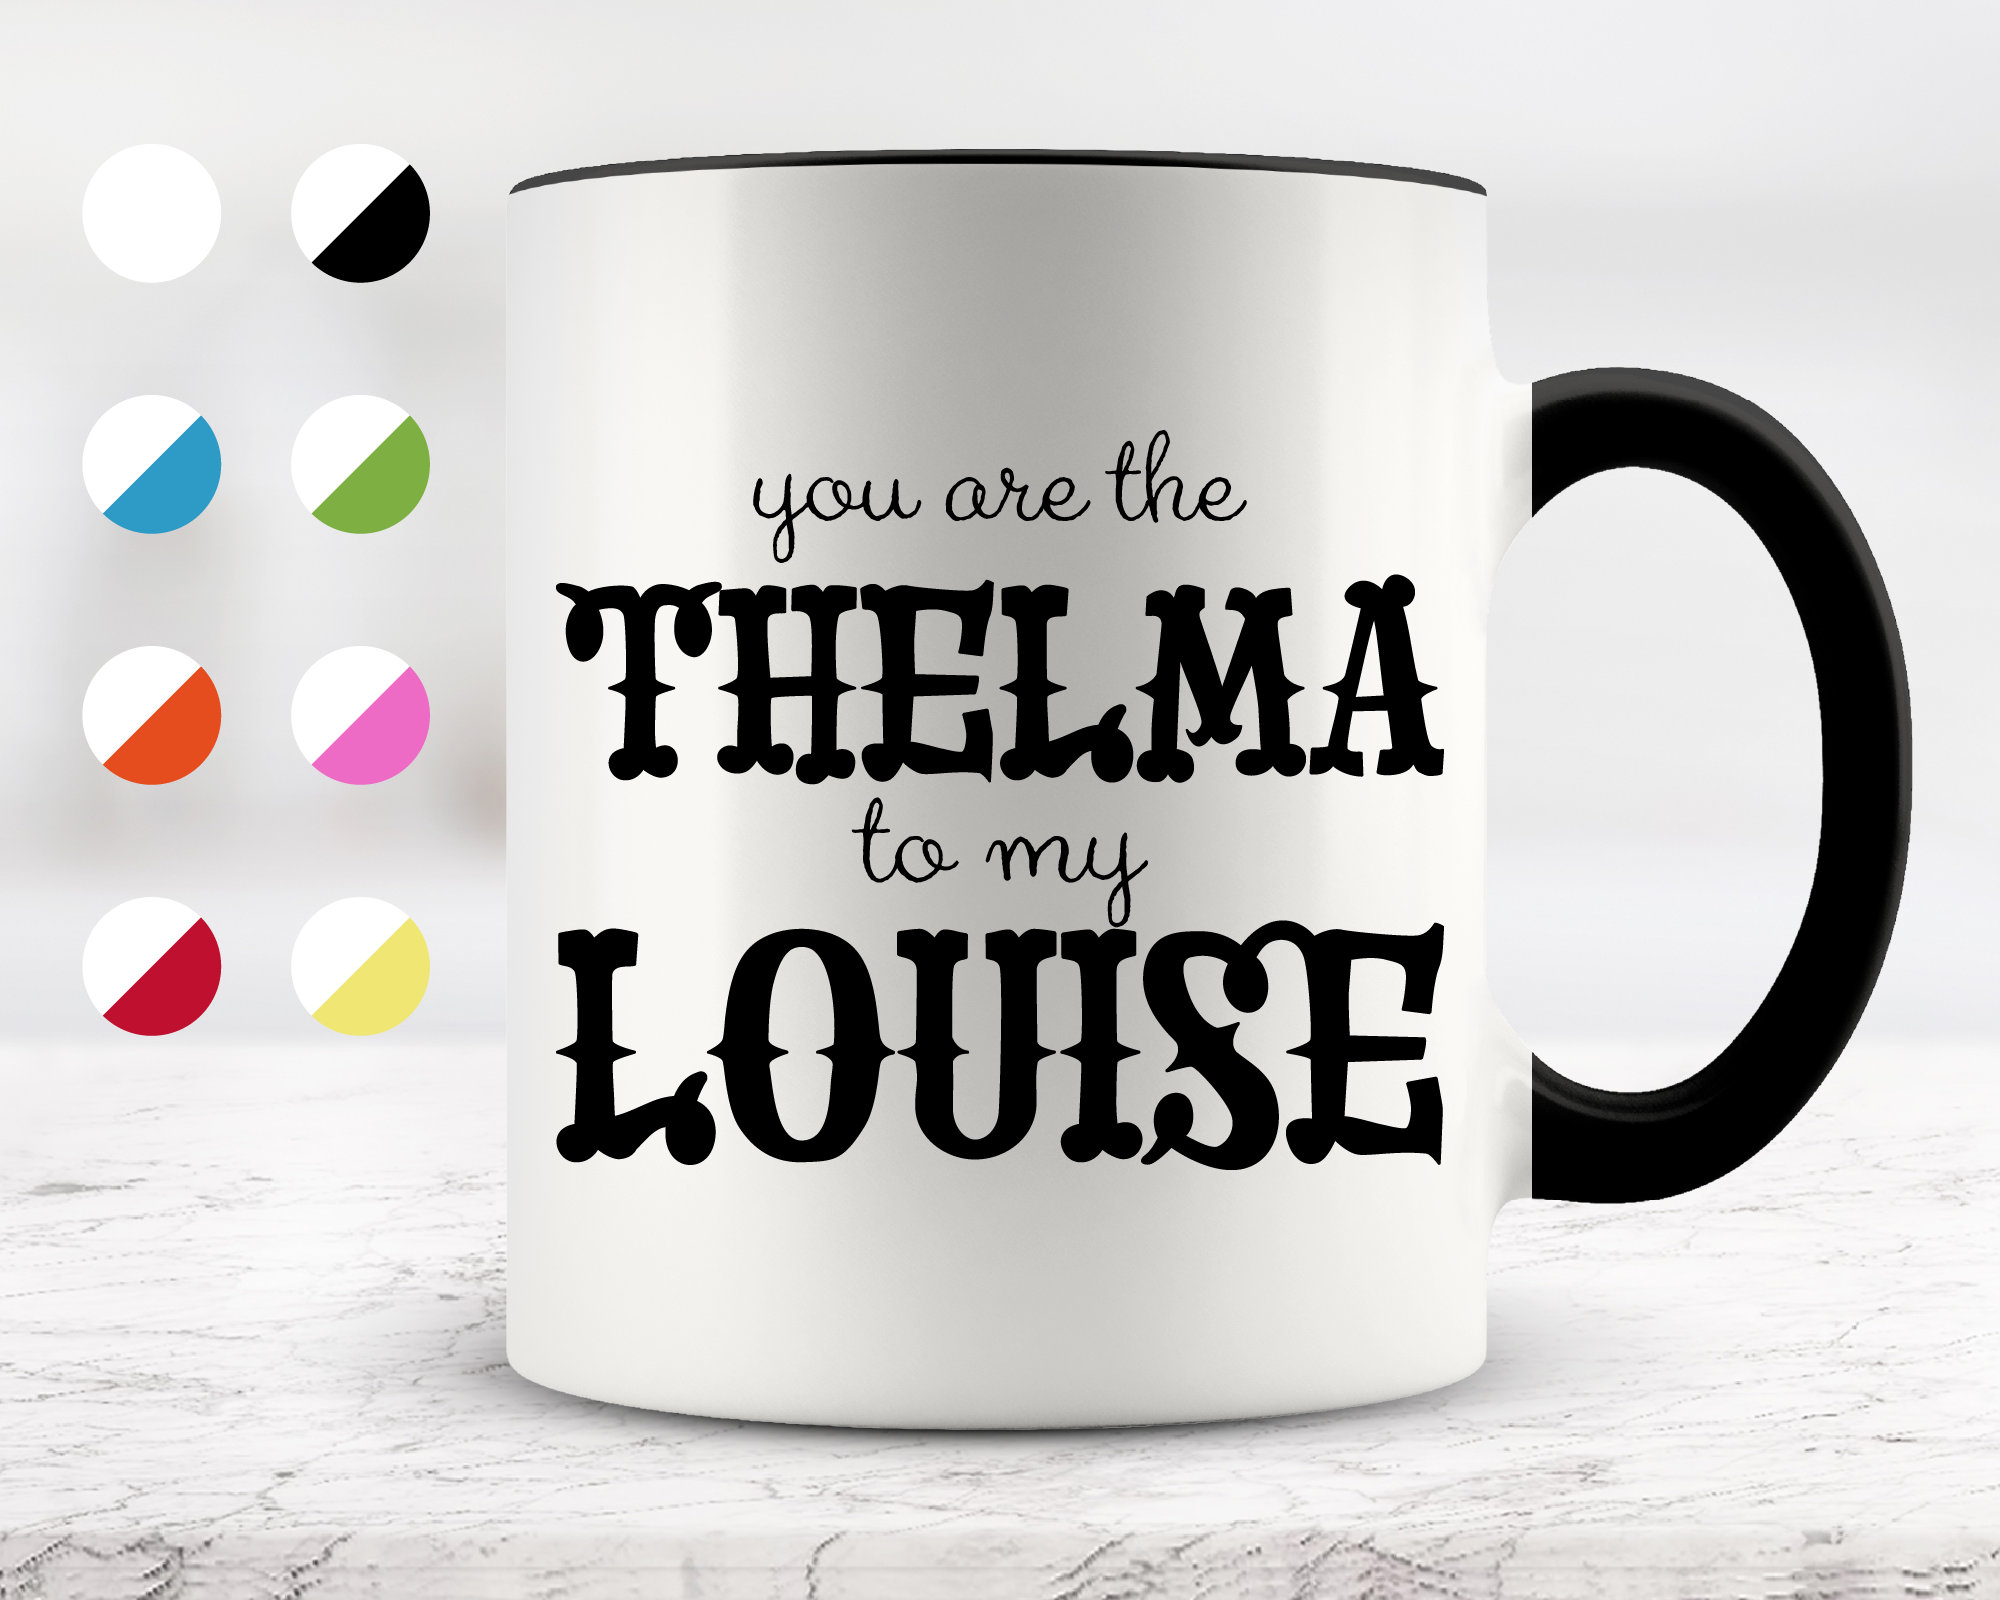 Thelma and Louise Gifts Flask- Bourbon Cowgirl Black